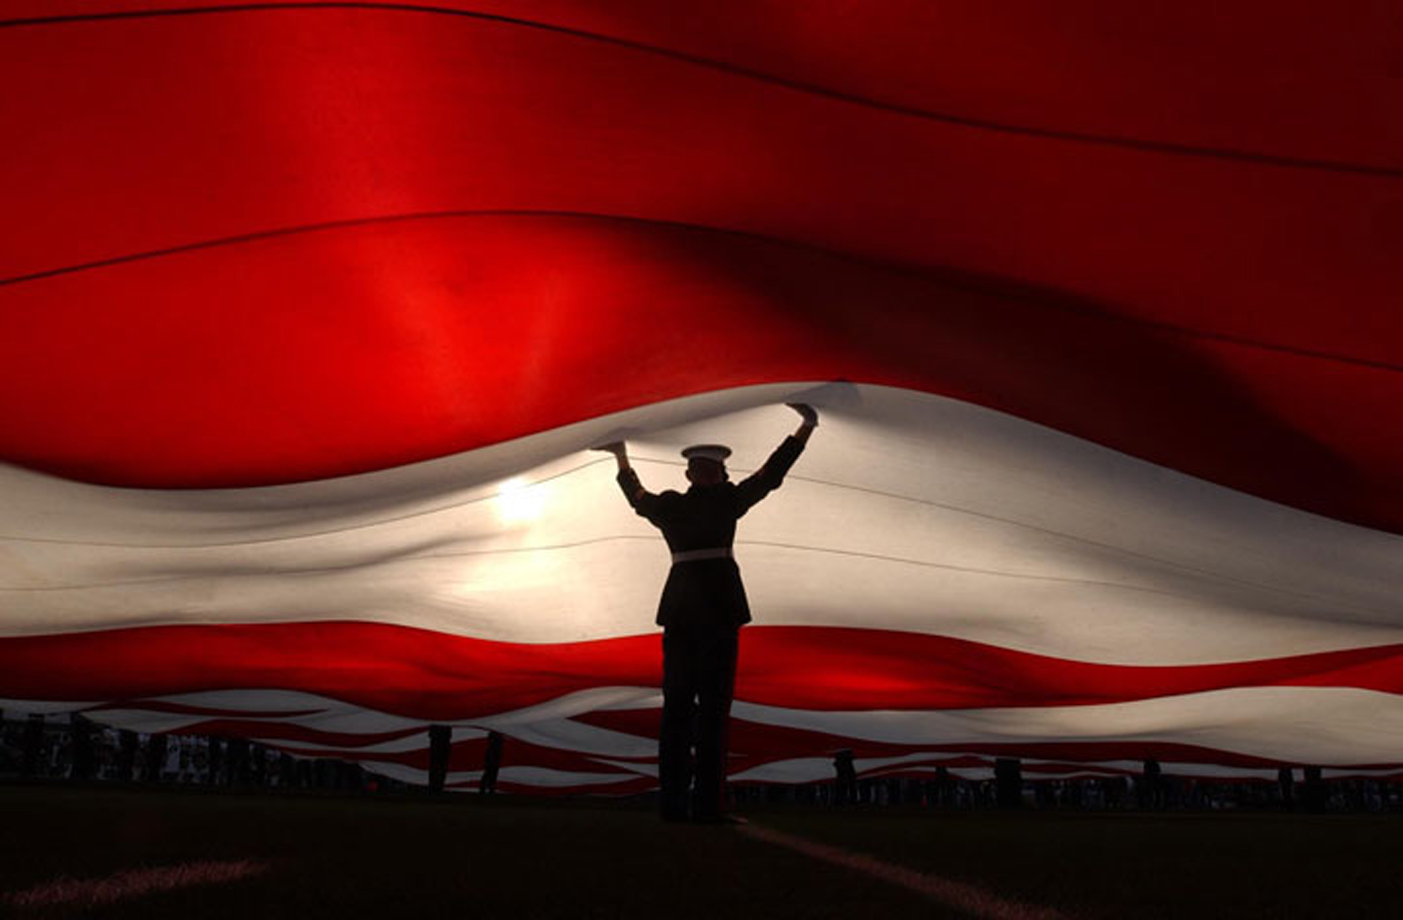  A Marine holds up a huge flag during the singing of the national anthem at the AFC Championship game between The Oakland Raiders and Tennessee Titans at Network Associates Coliseum in Oakland, California. January 12, 2003 